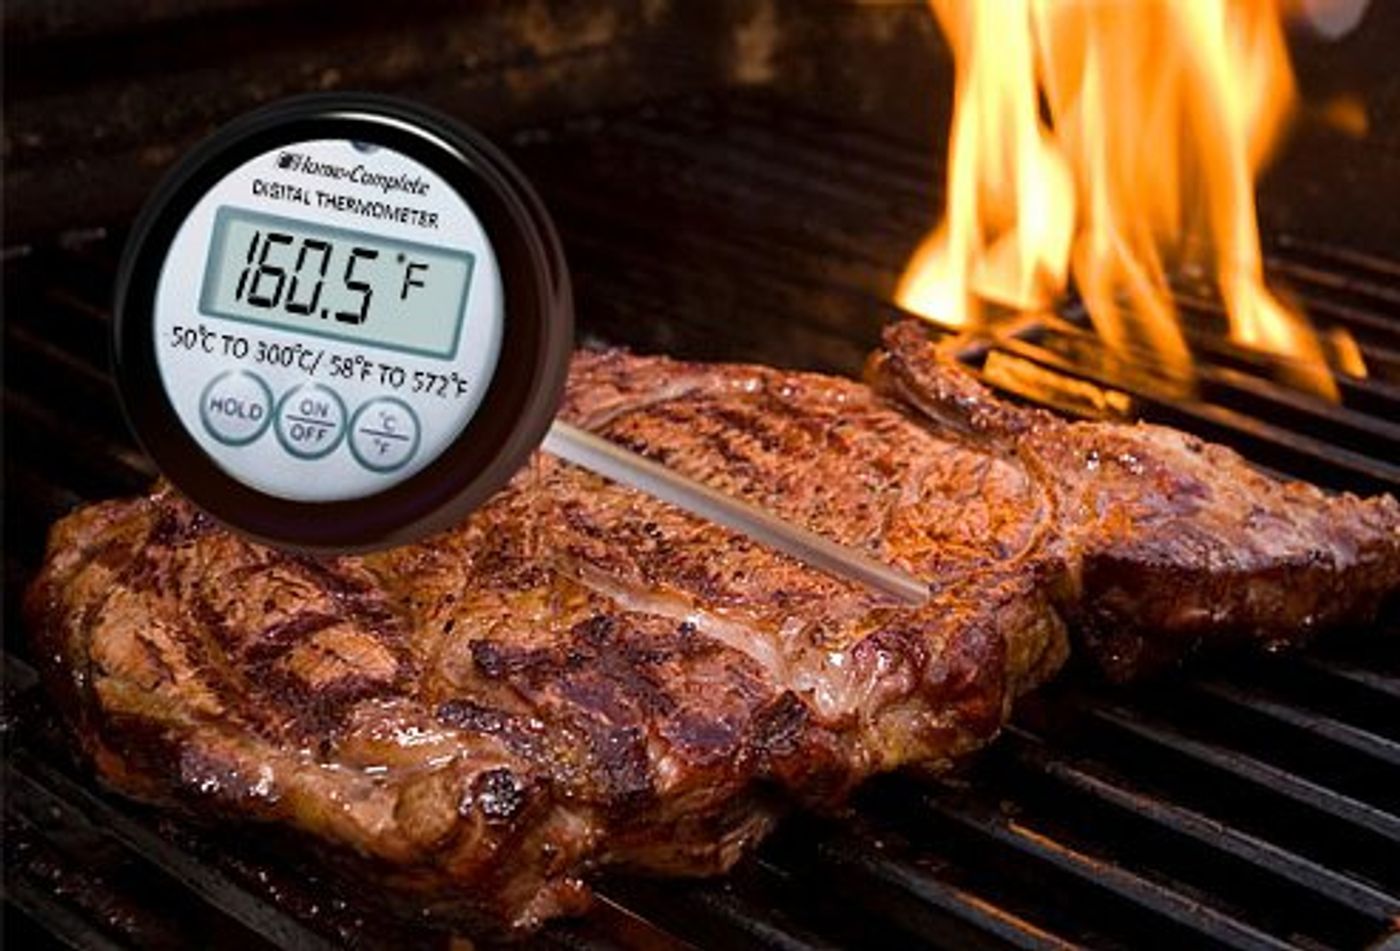 Try using a meat thermometer!